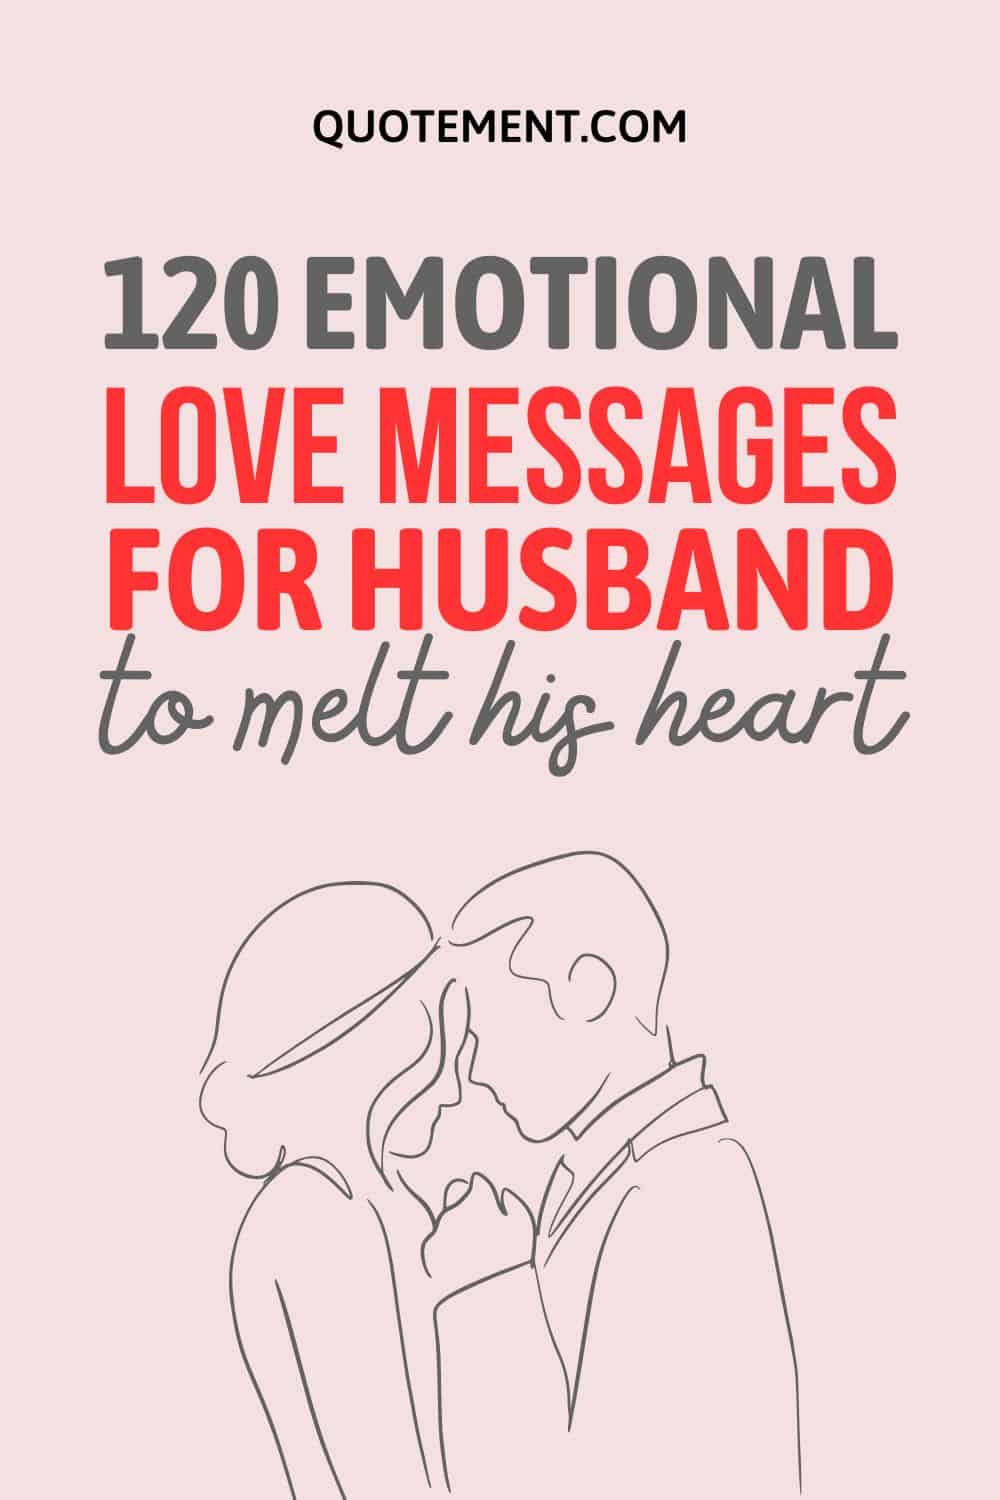 120 Emotional Love Messages For Husband To Melt His Heart 